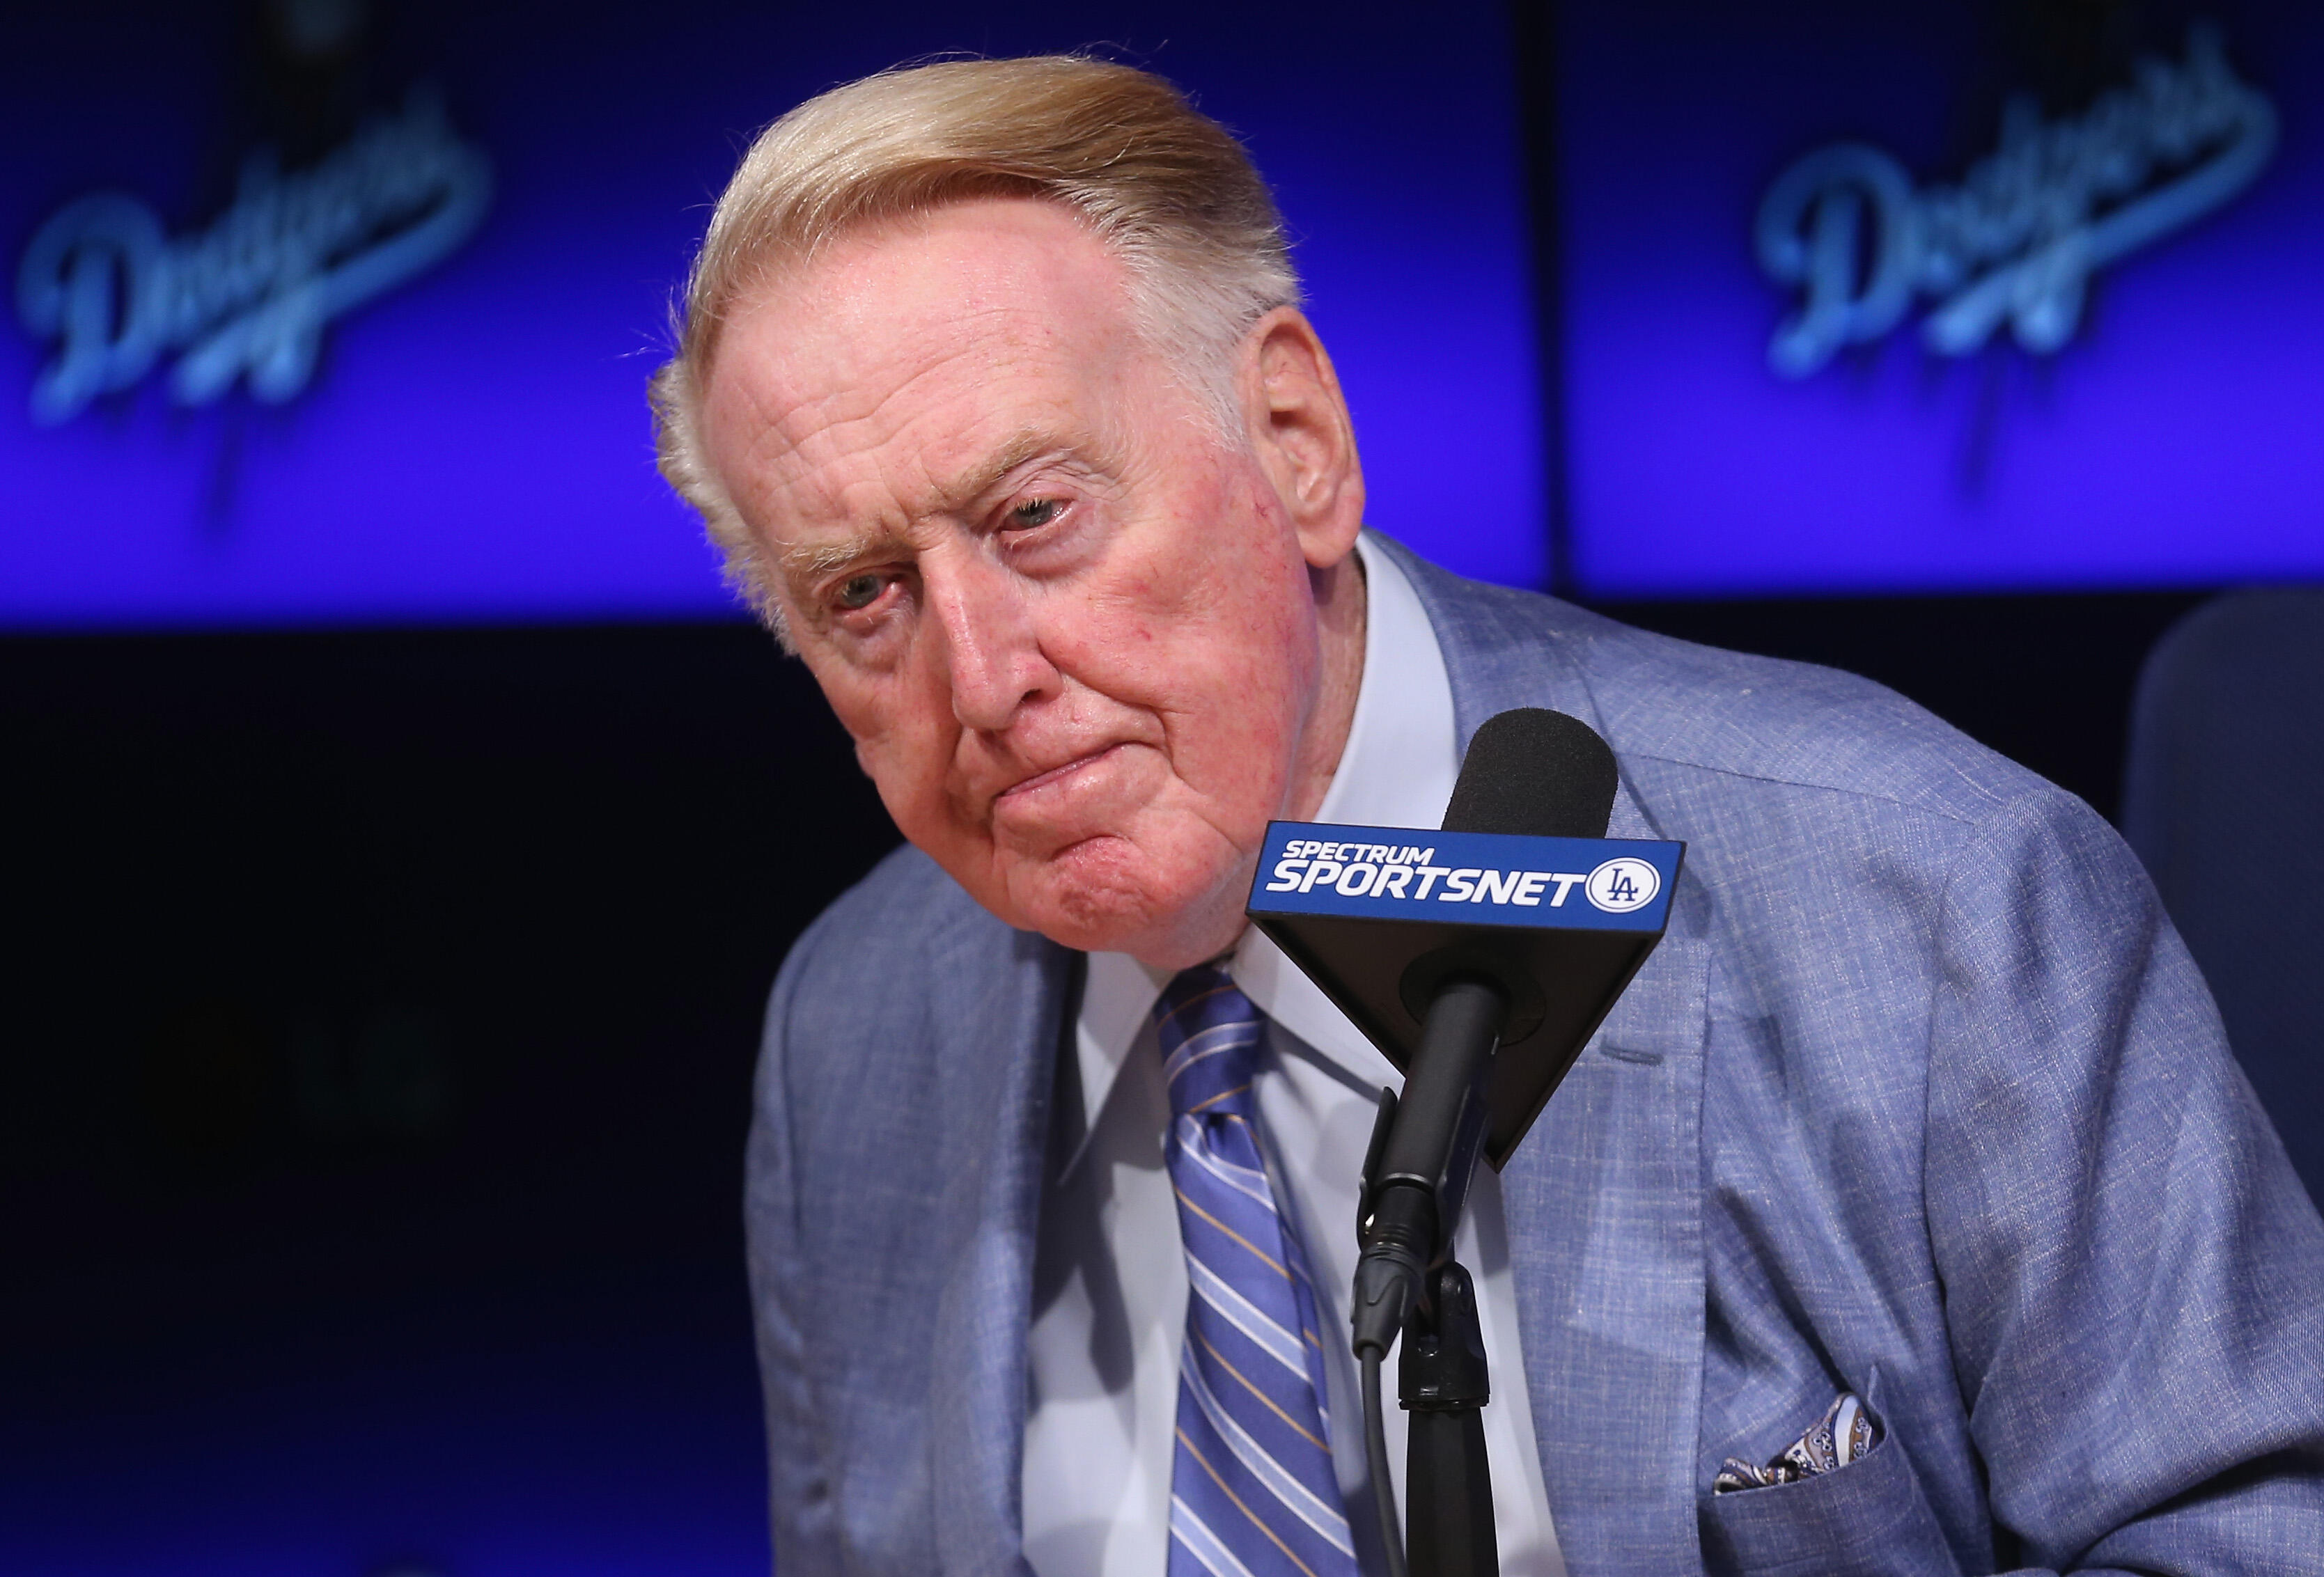 LOS ANGELES, CALIFORNIA - SEPTEMBER 24:  Long time Los Angeles Dodgers announcer Vin Scully listens to a question at a press conference discussing his career upcoming retirement at Dodger Stadium on September 24, 2016 in Los Angeles, California.  (Photo b